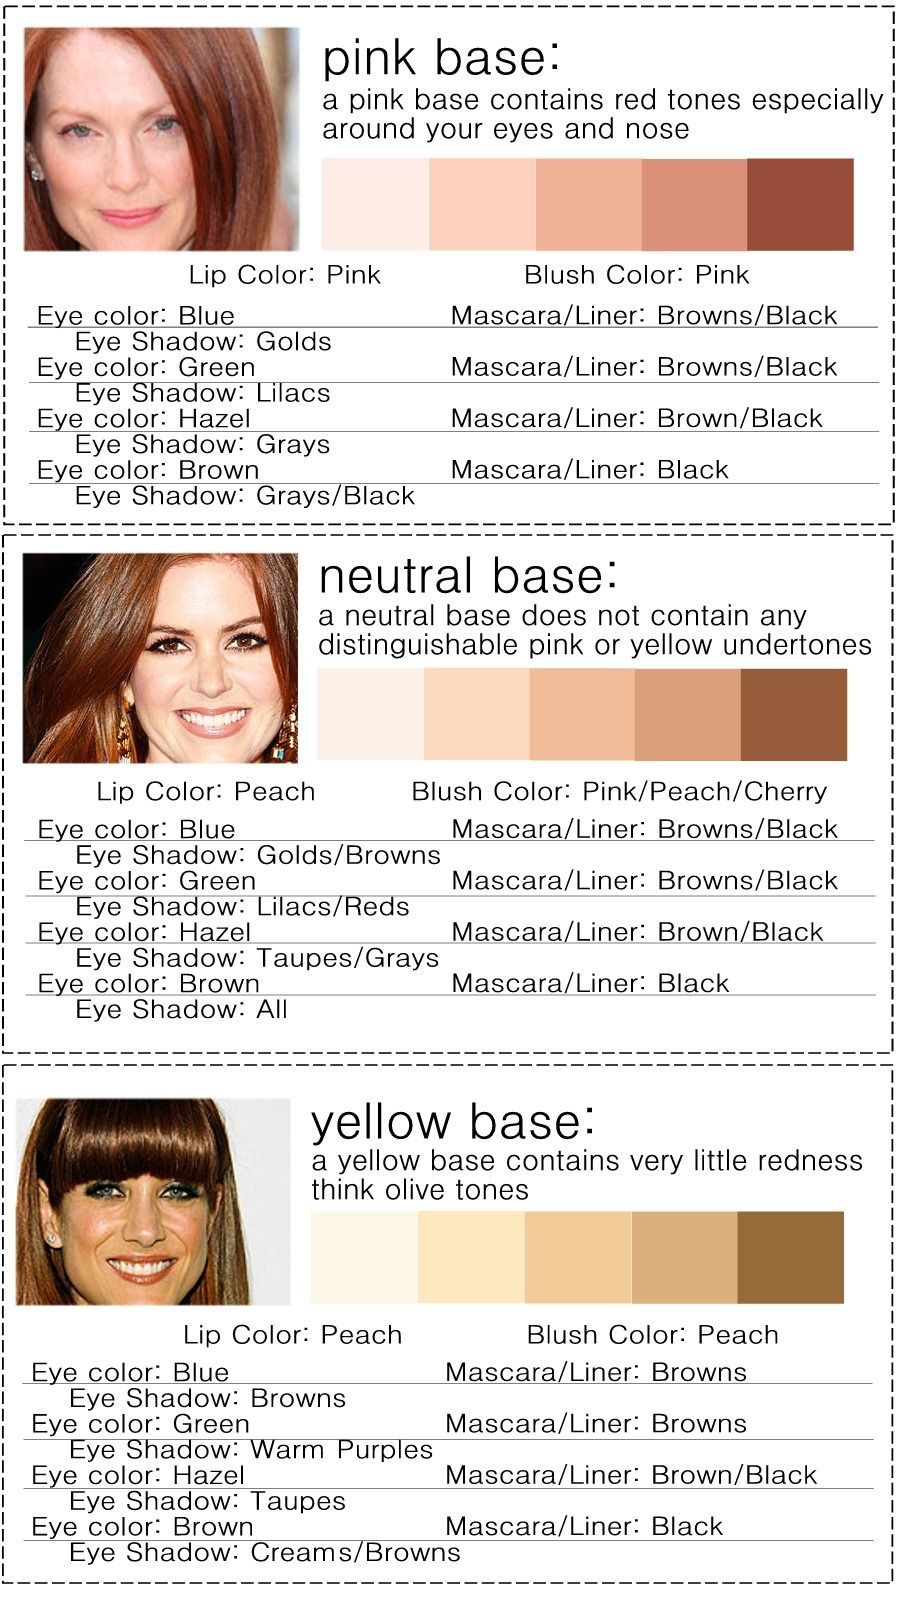 Redhead cheat sheet. The most flattering #makeup shades for you.